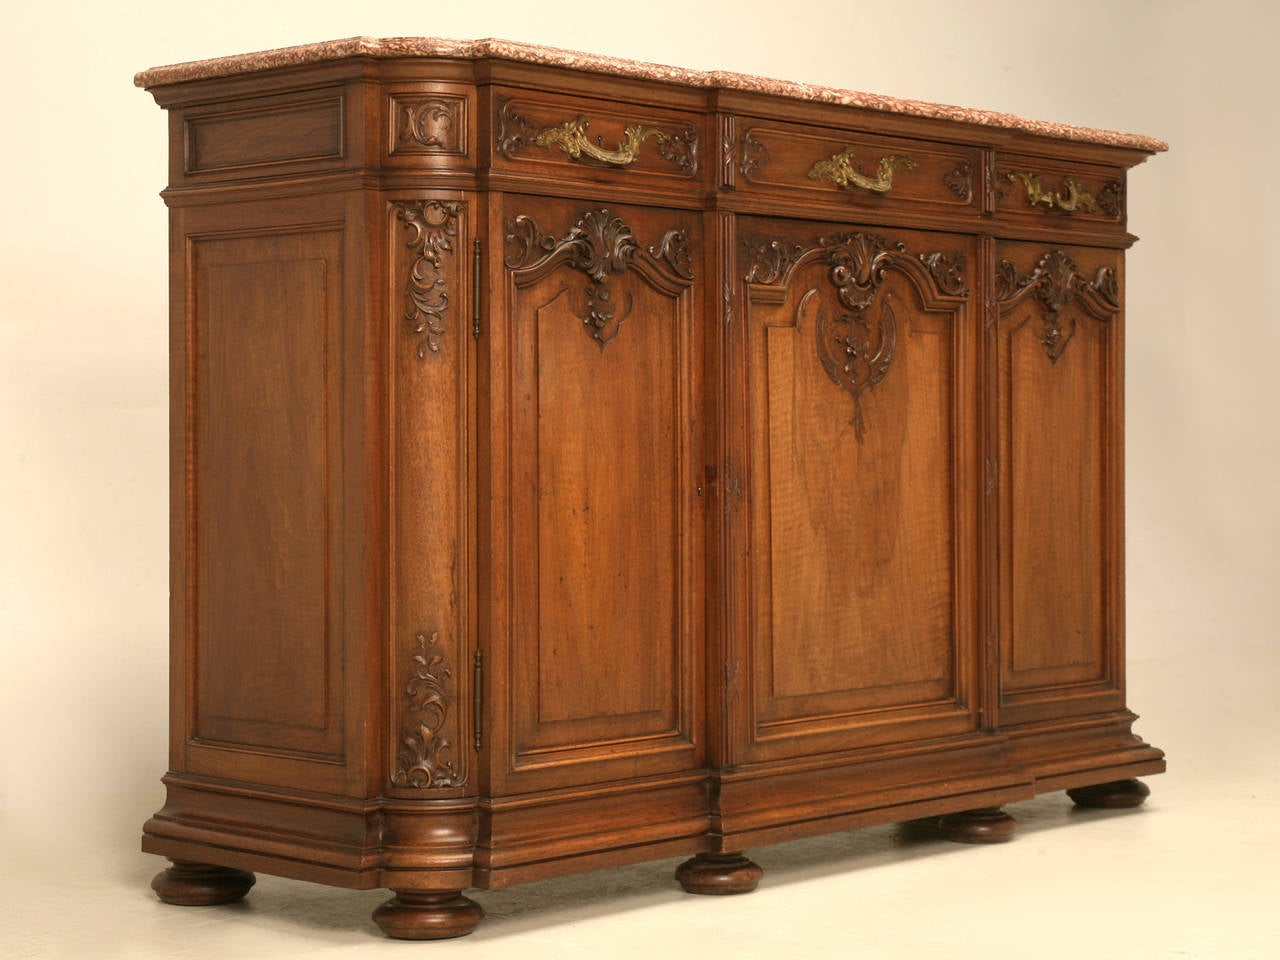 Ch.Jeanselme & C° Paris was a supplier of furniture to the French and Imperial Courts of France. Opened in 1824 as Jeanselme Freres, with the stamp changing to 'Ch. Jeanselme et Cie 'in 1883 and was used until 1930. We purchased this buffet, along